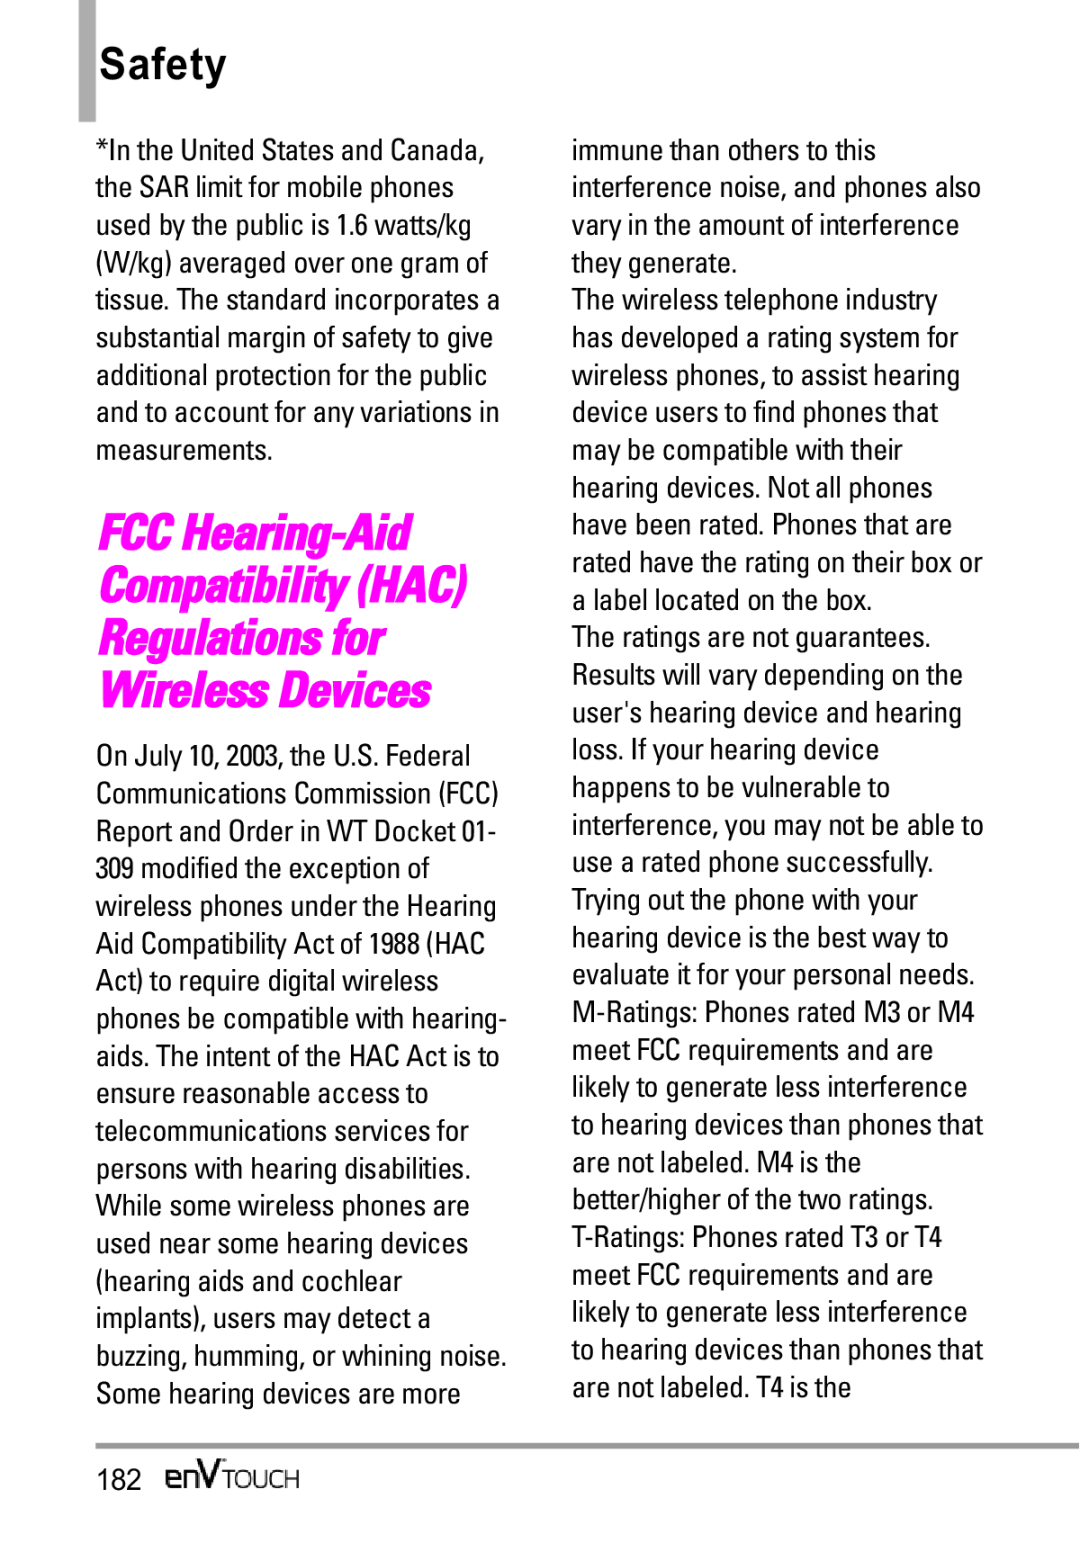 LG Electronics MMBB0332901 manual FCC Hearing-Aid Compatibility HAC Regulations for Wireless Devices, Safety 